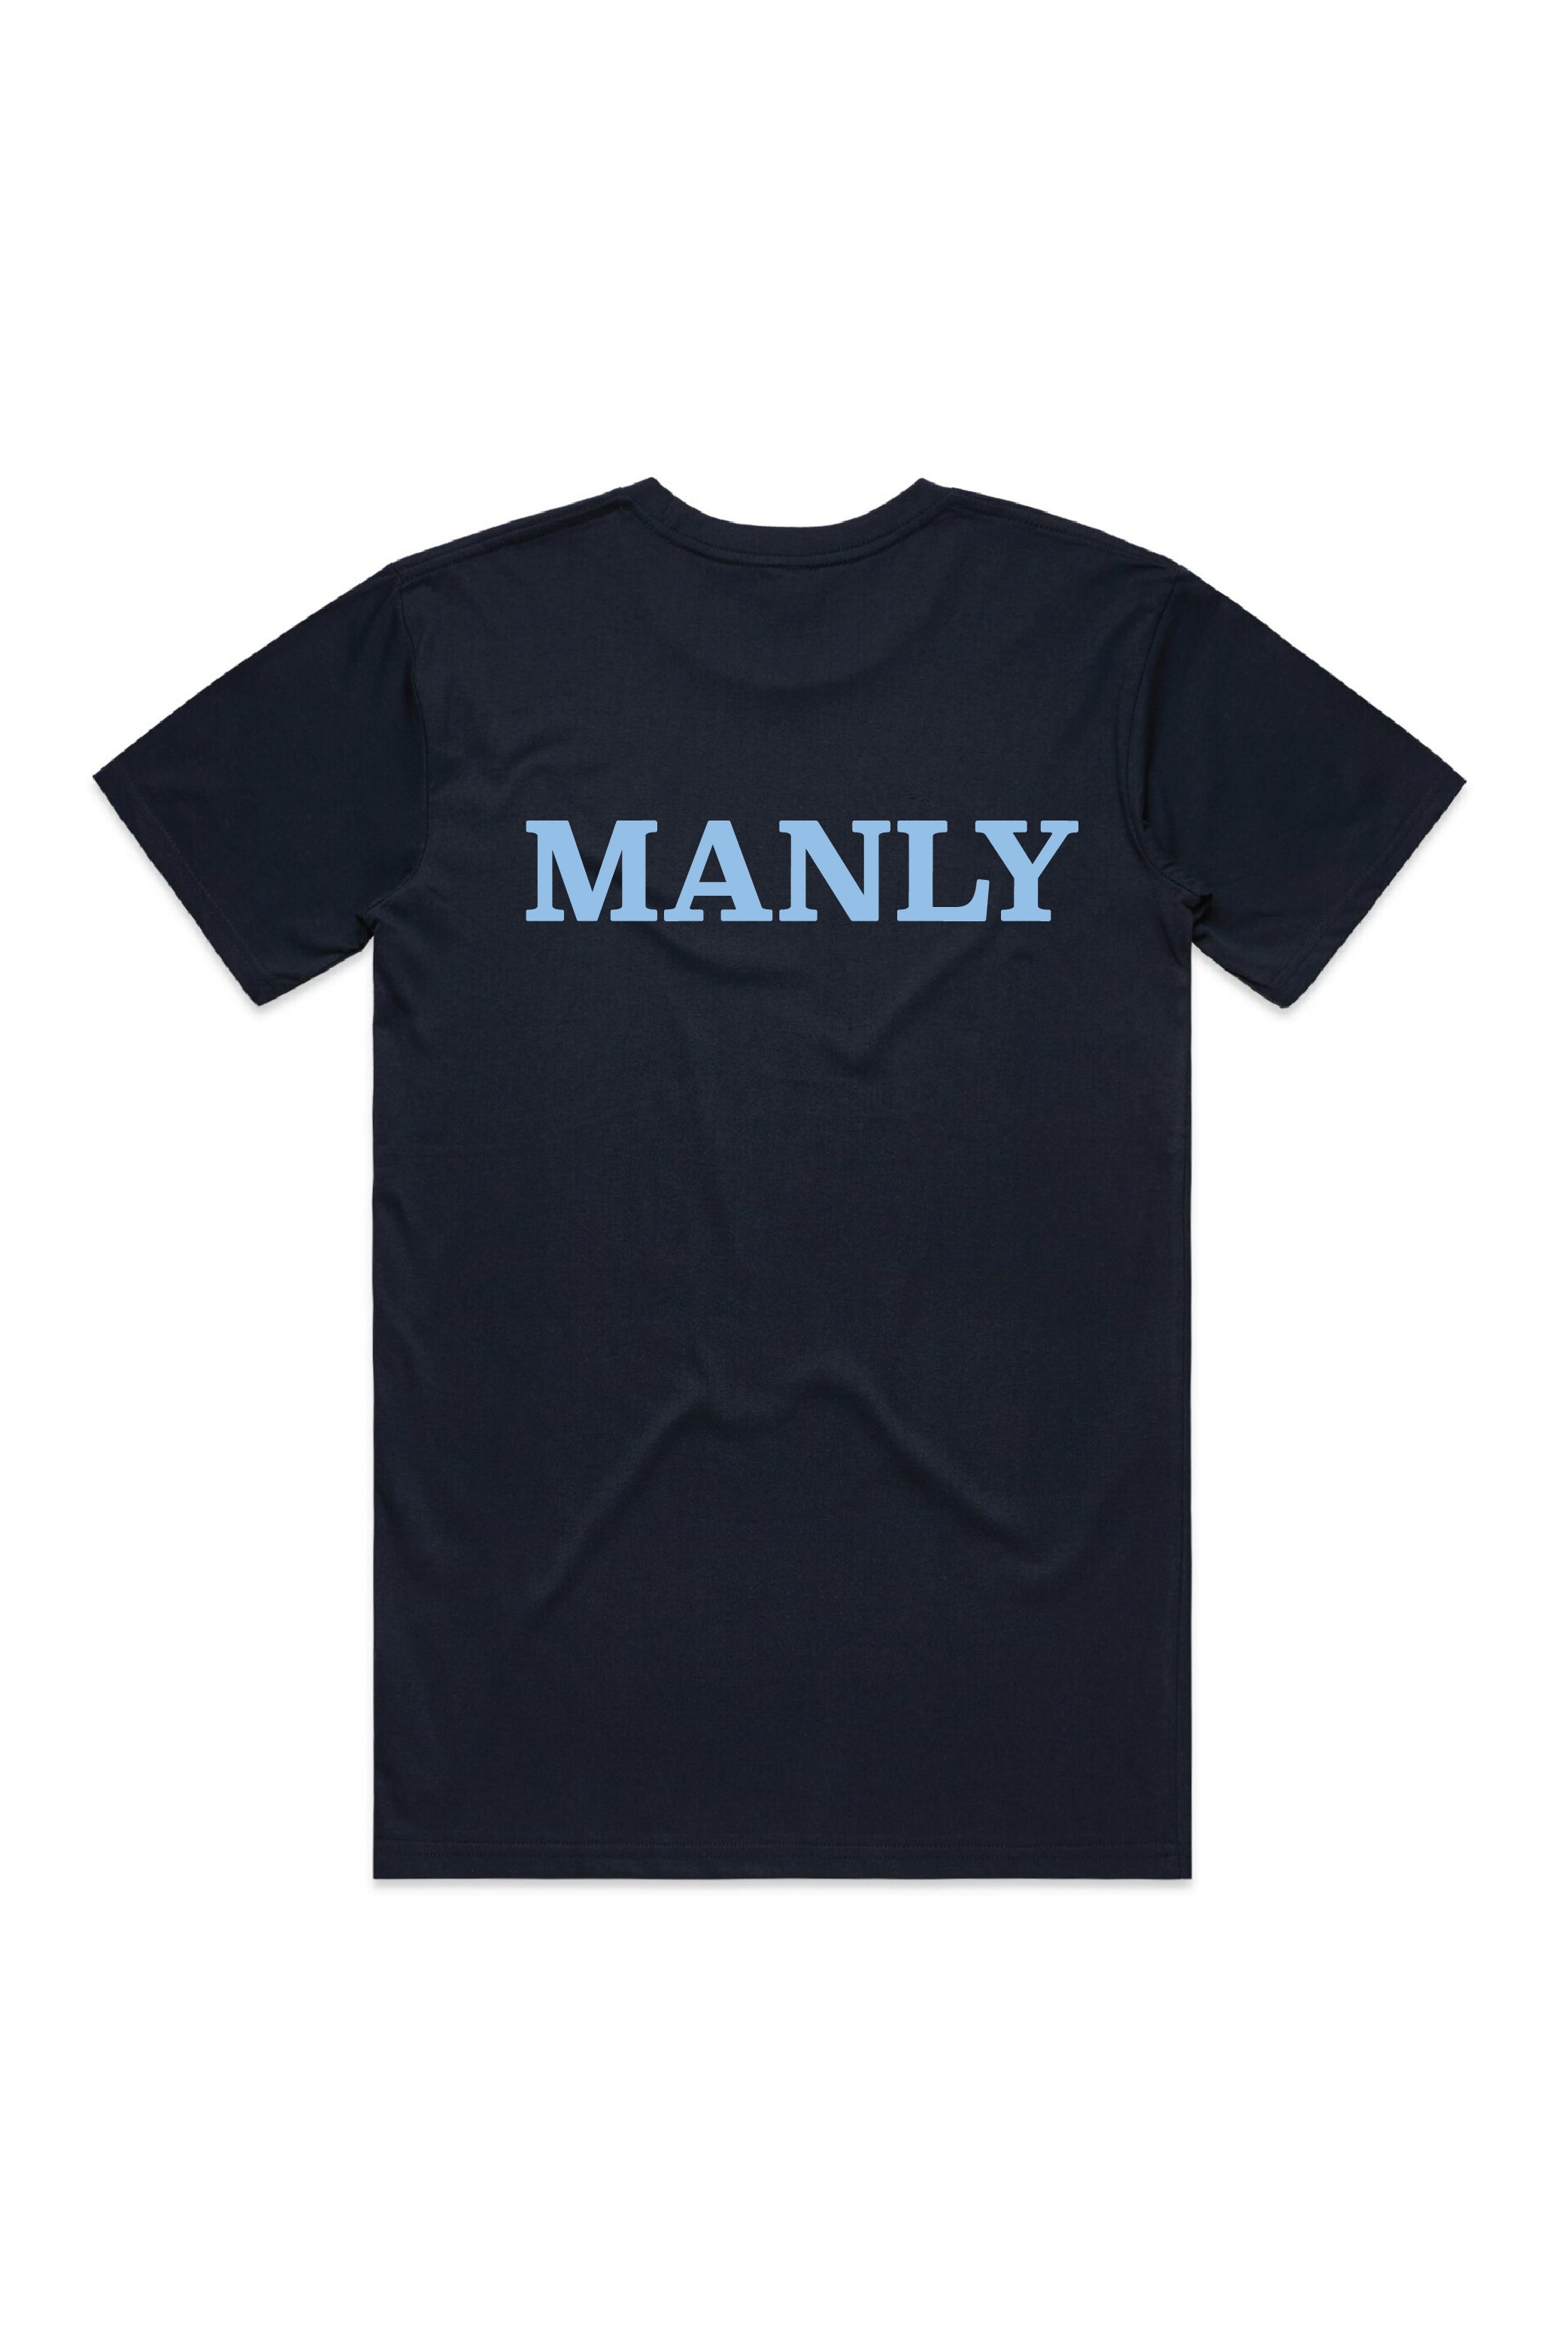 Manly Swimming Club Women's Cotton Tee